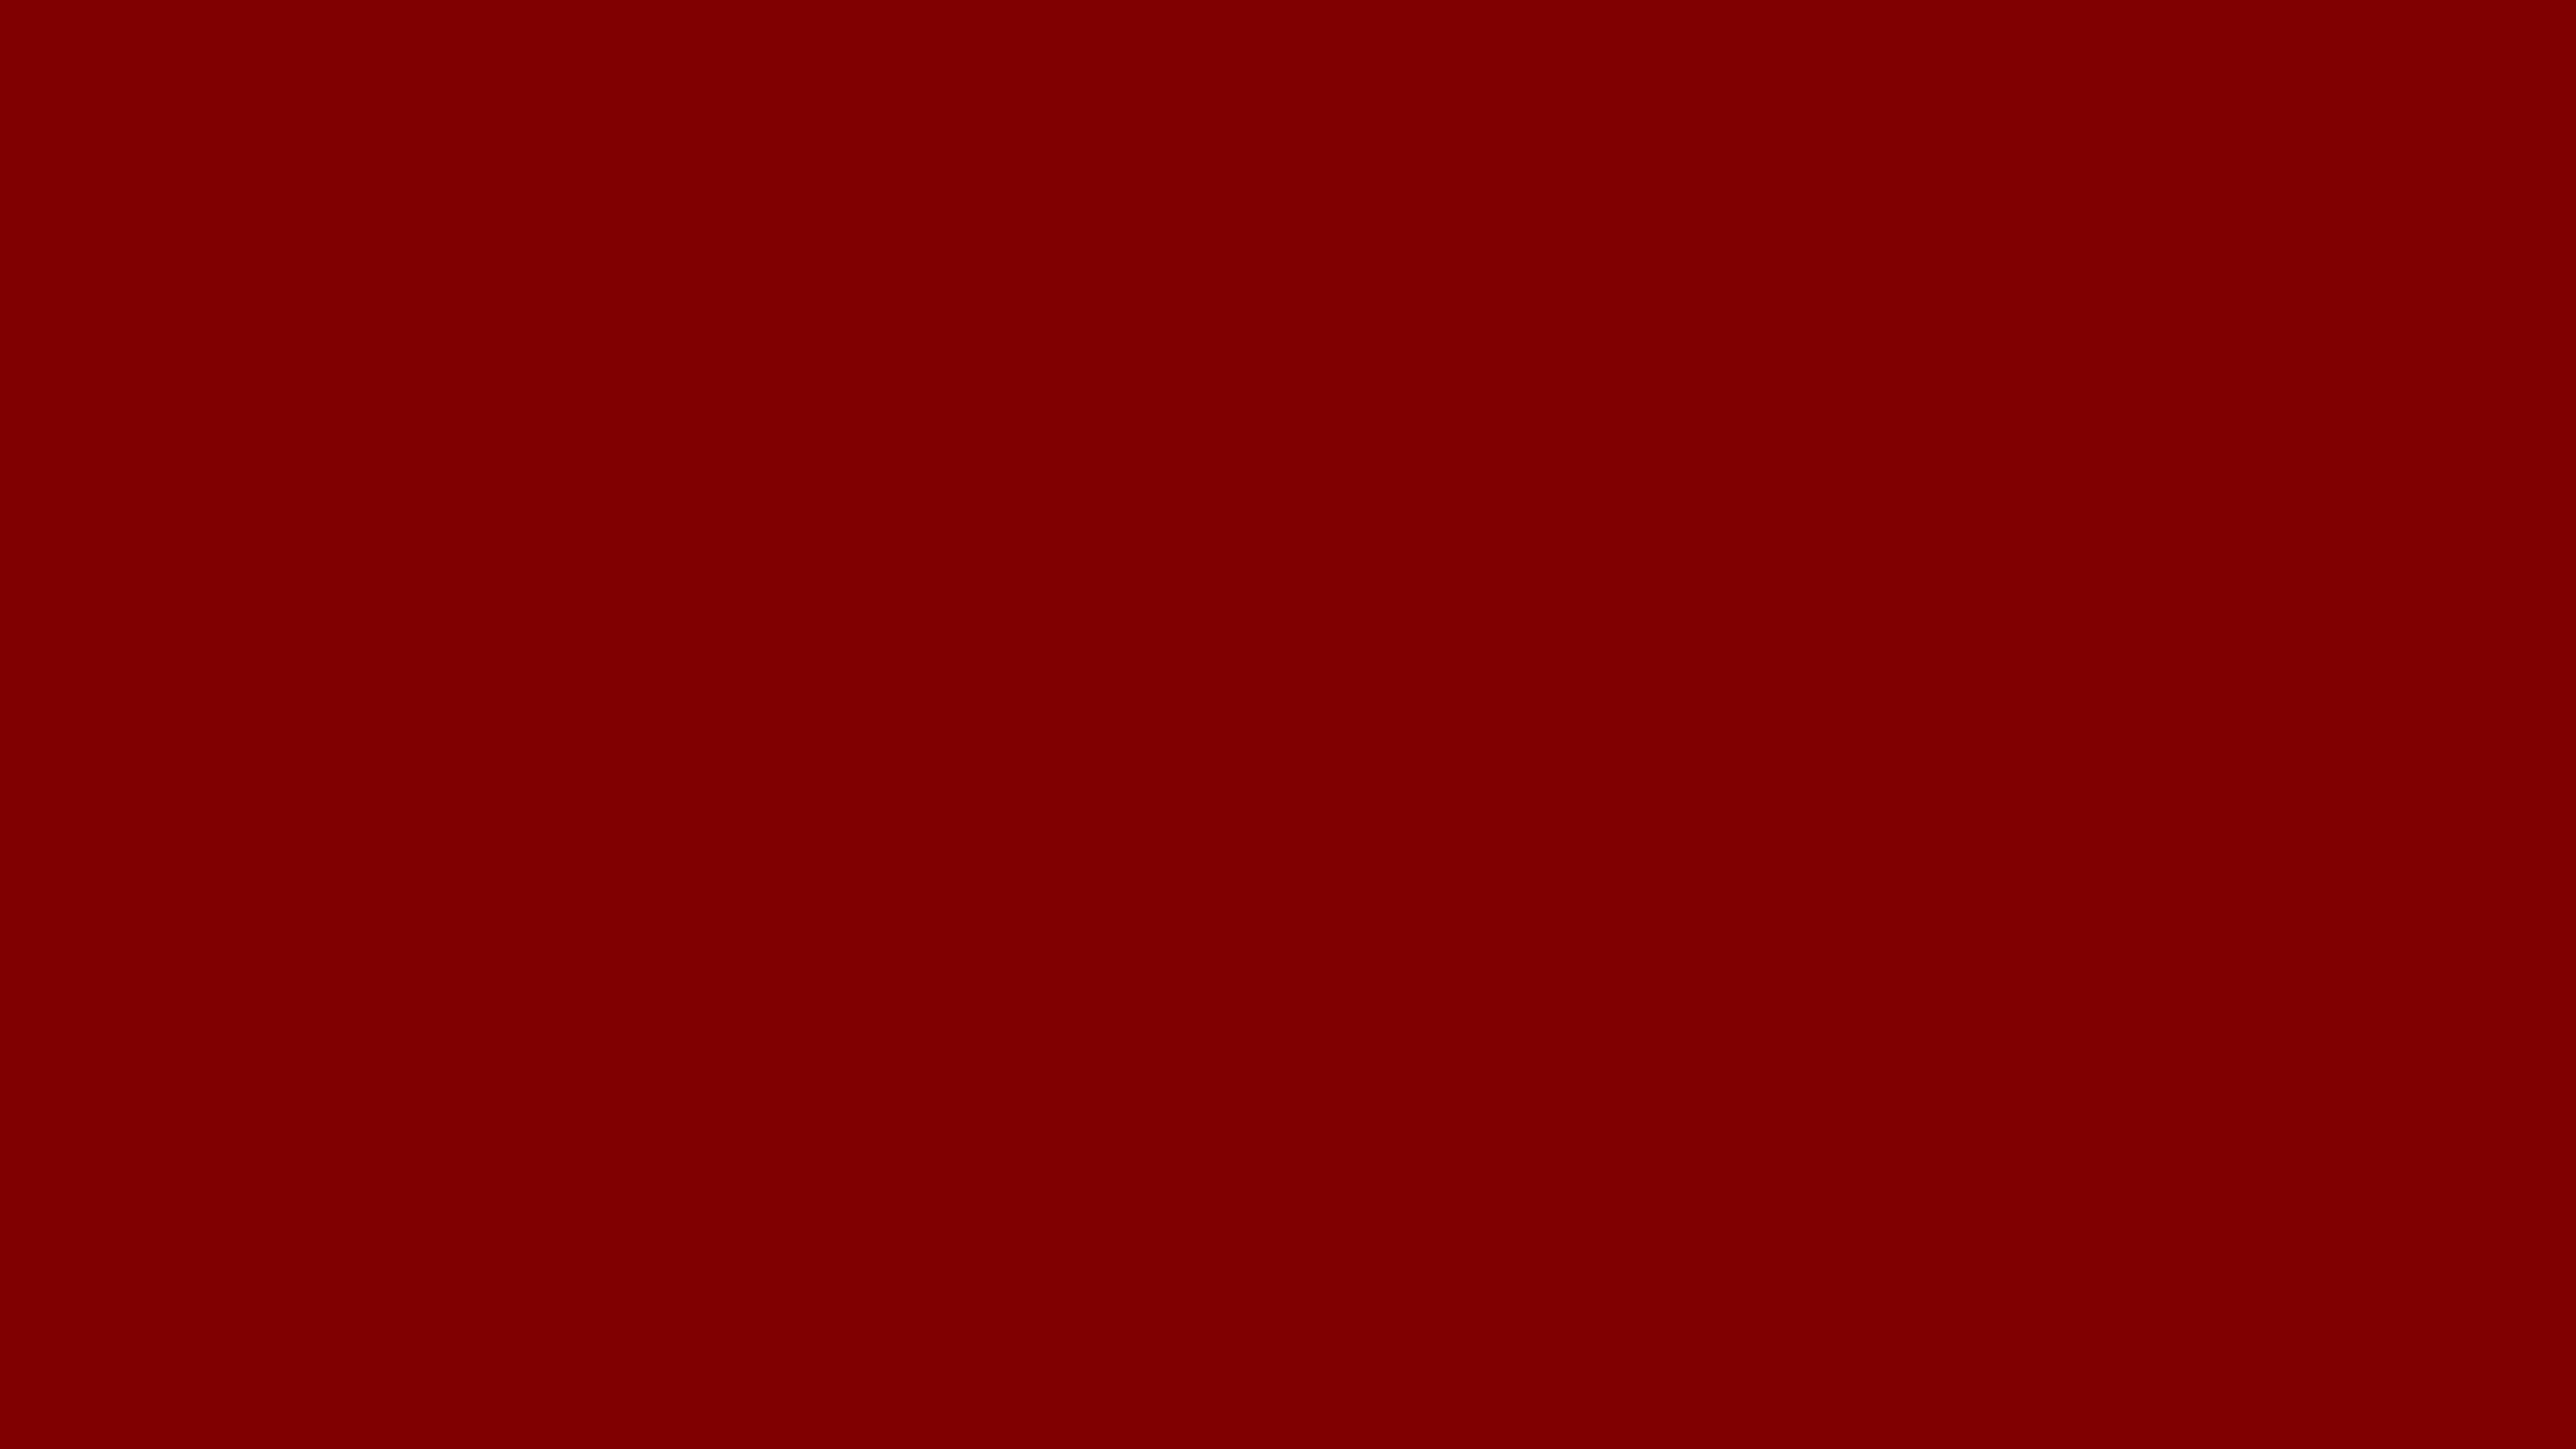 5120x2880 Maroon Web Solid Color Background